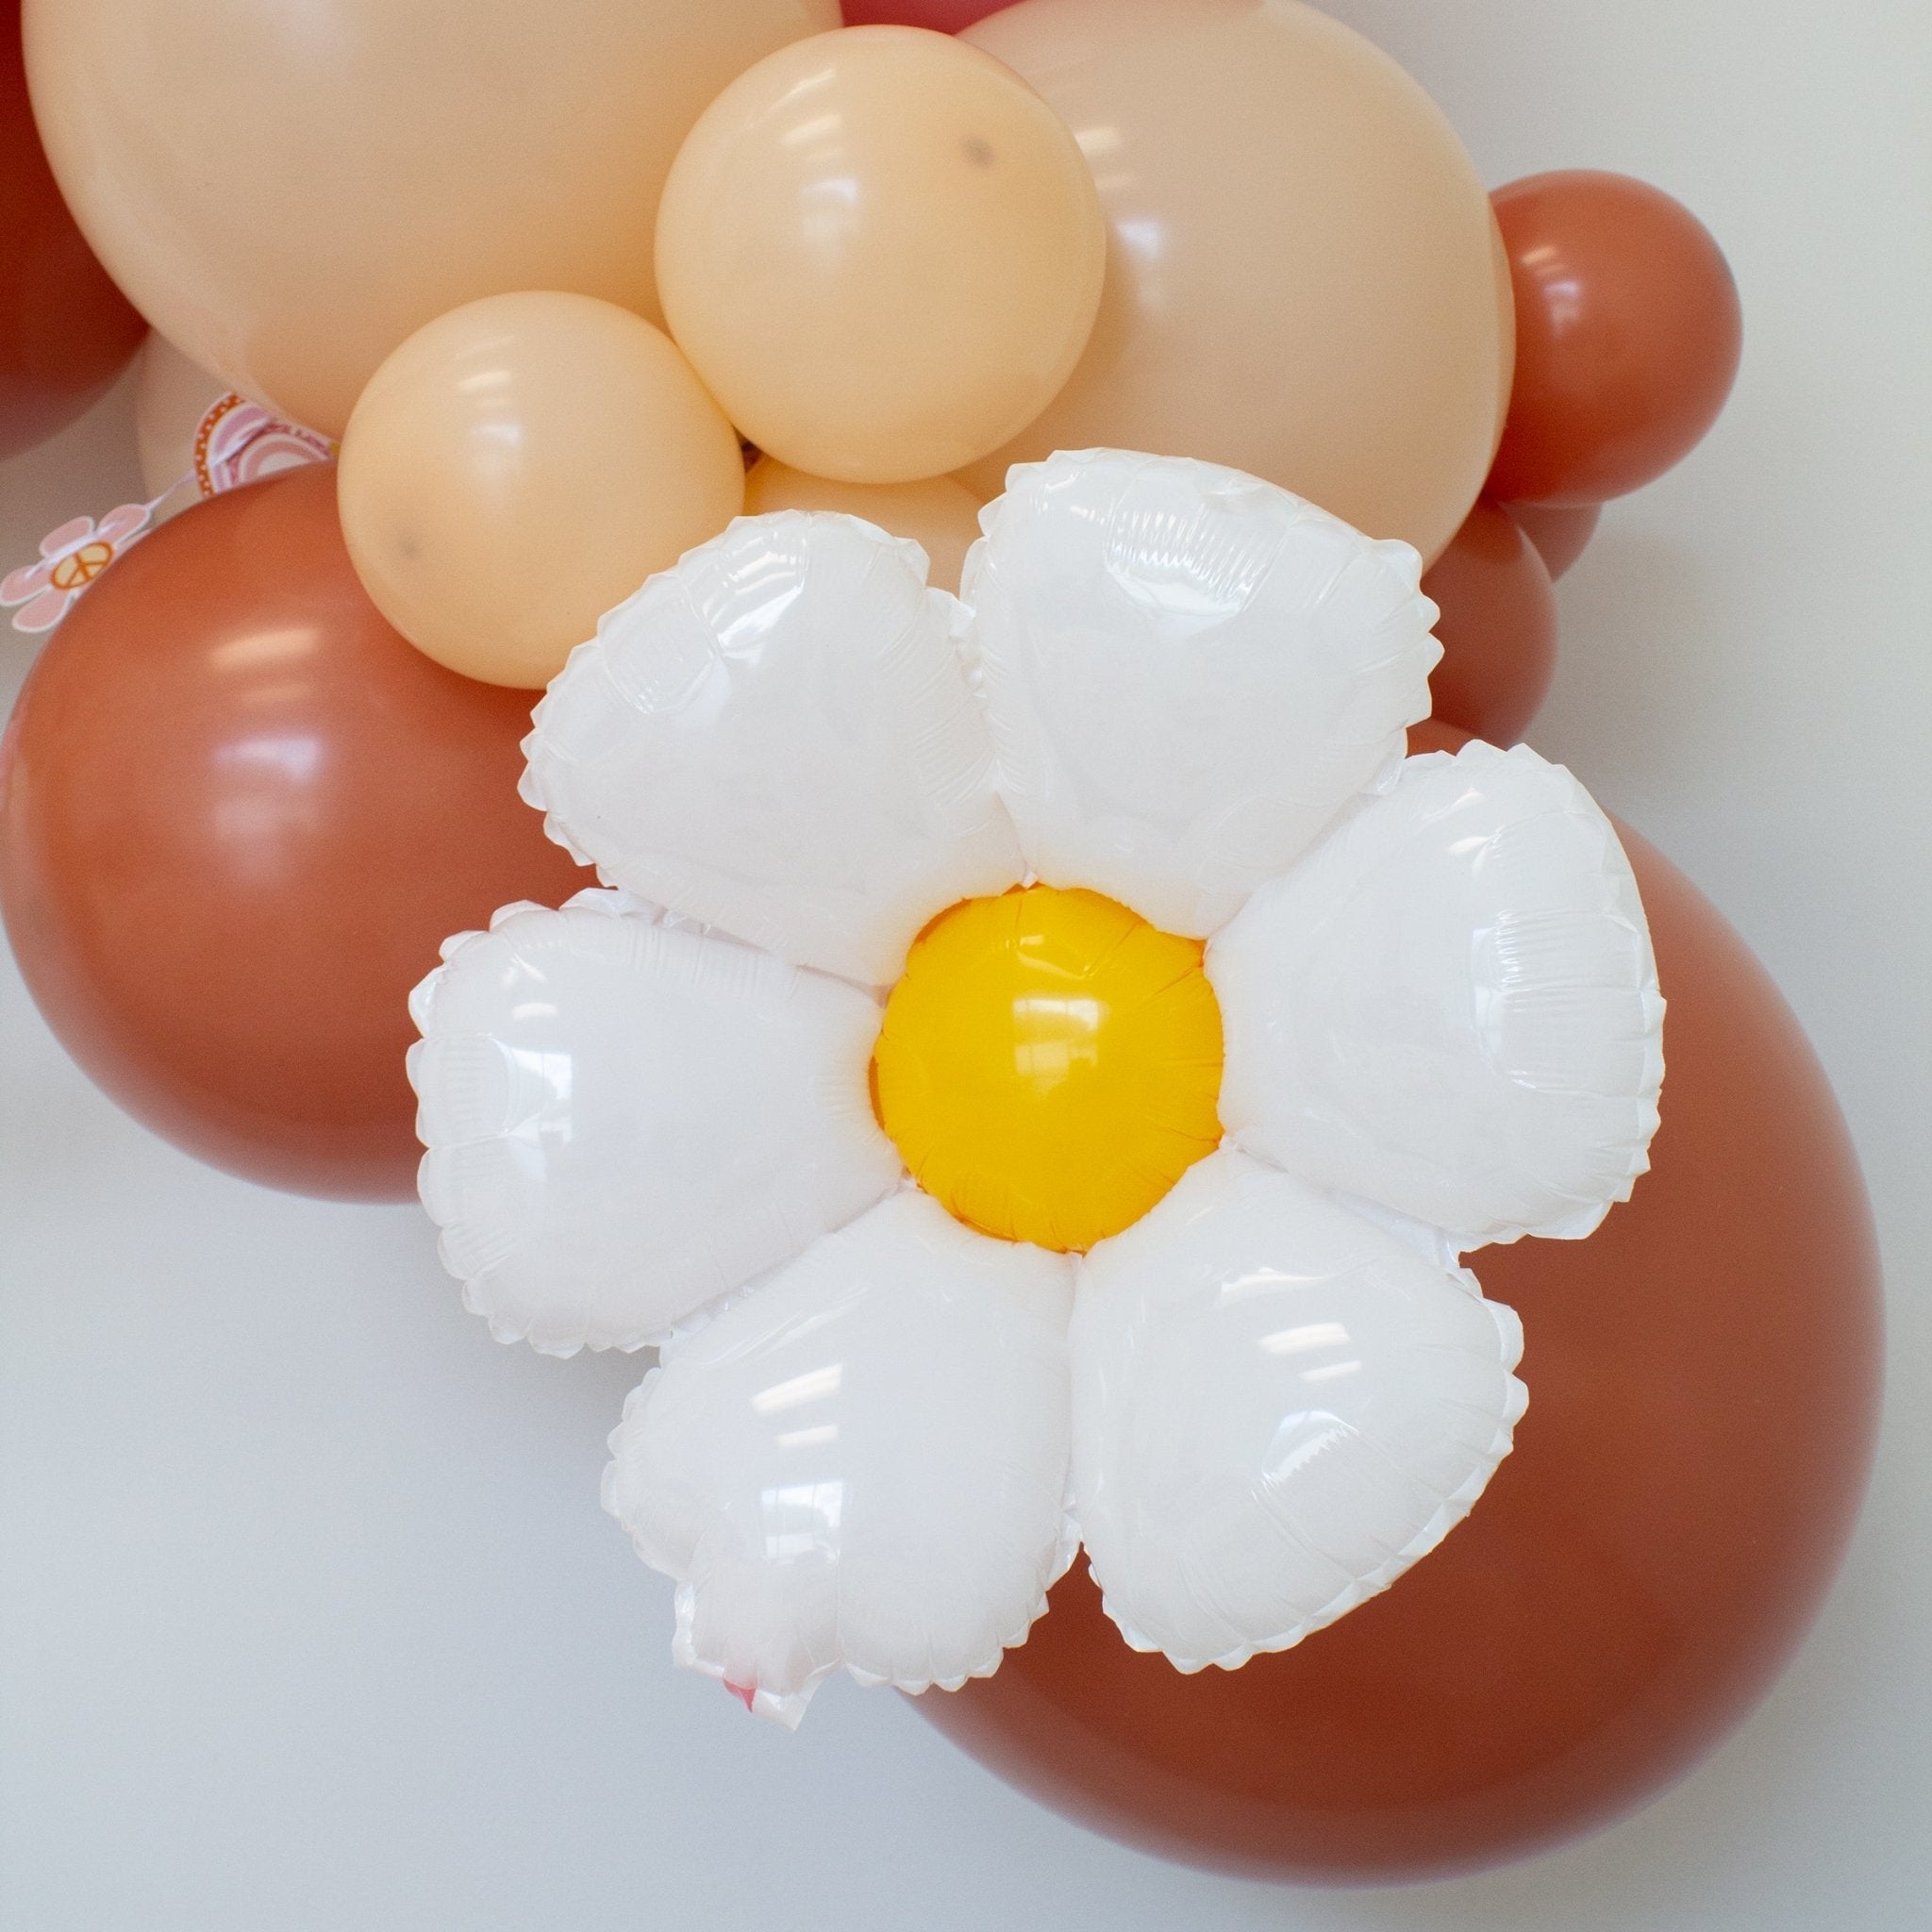 Small Daisy Flower Balloon (18 Inches) from Ellie's Party Supply